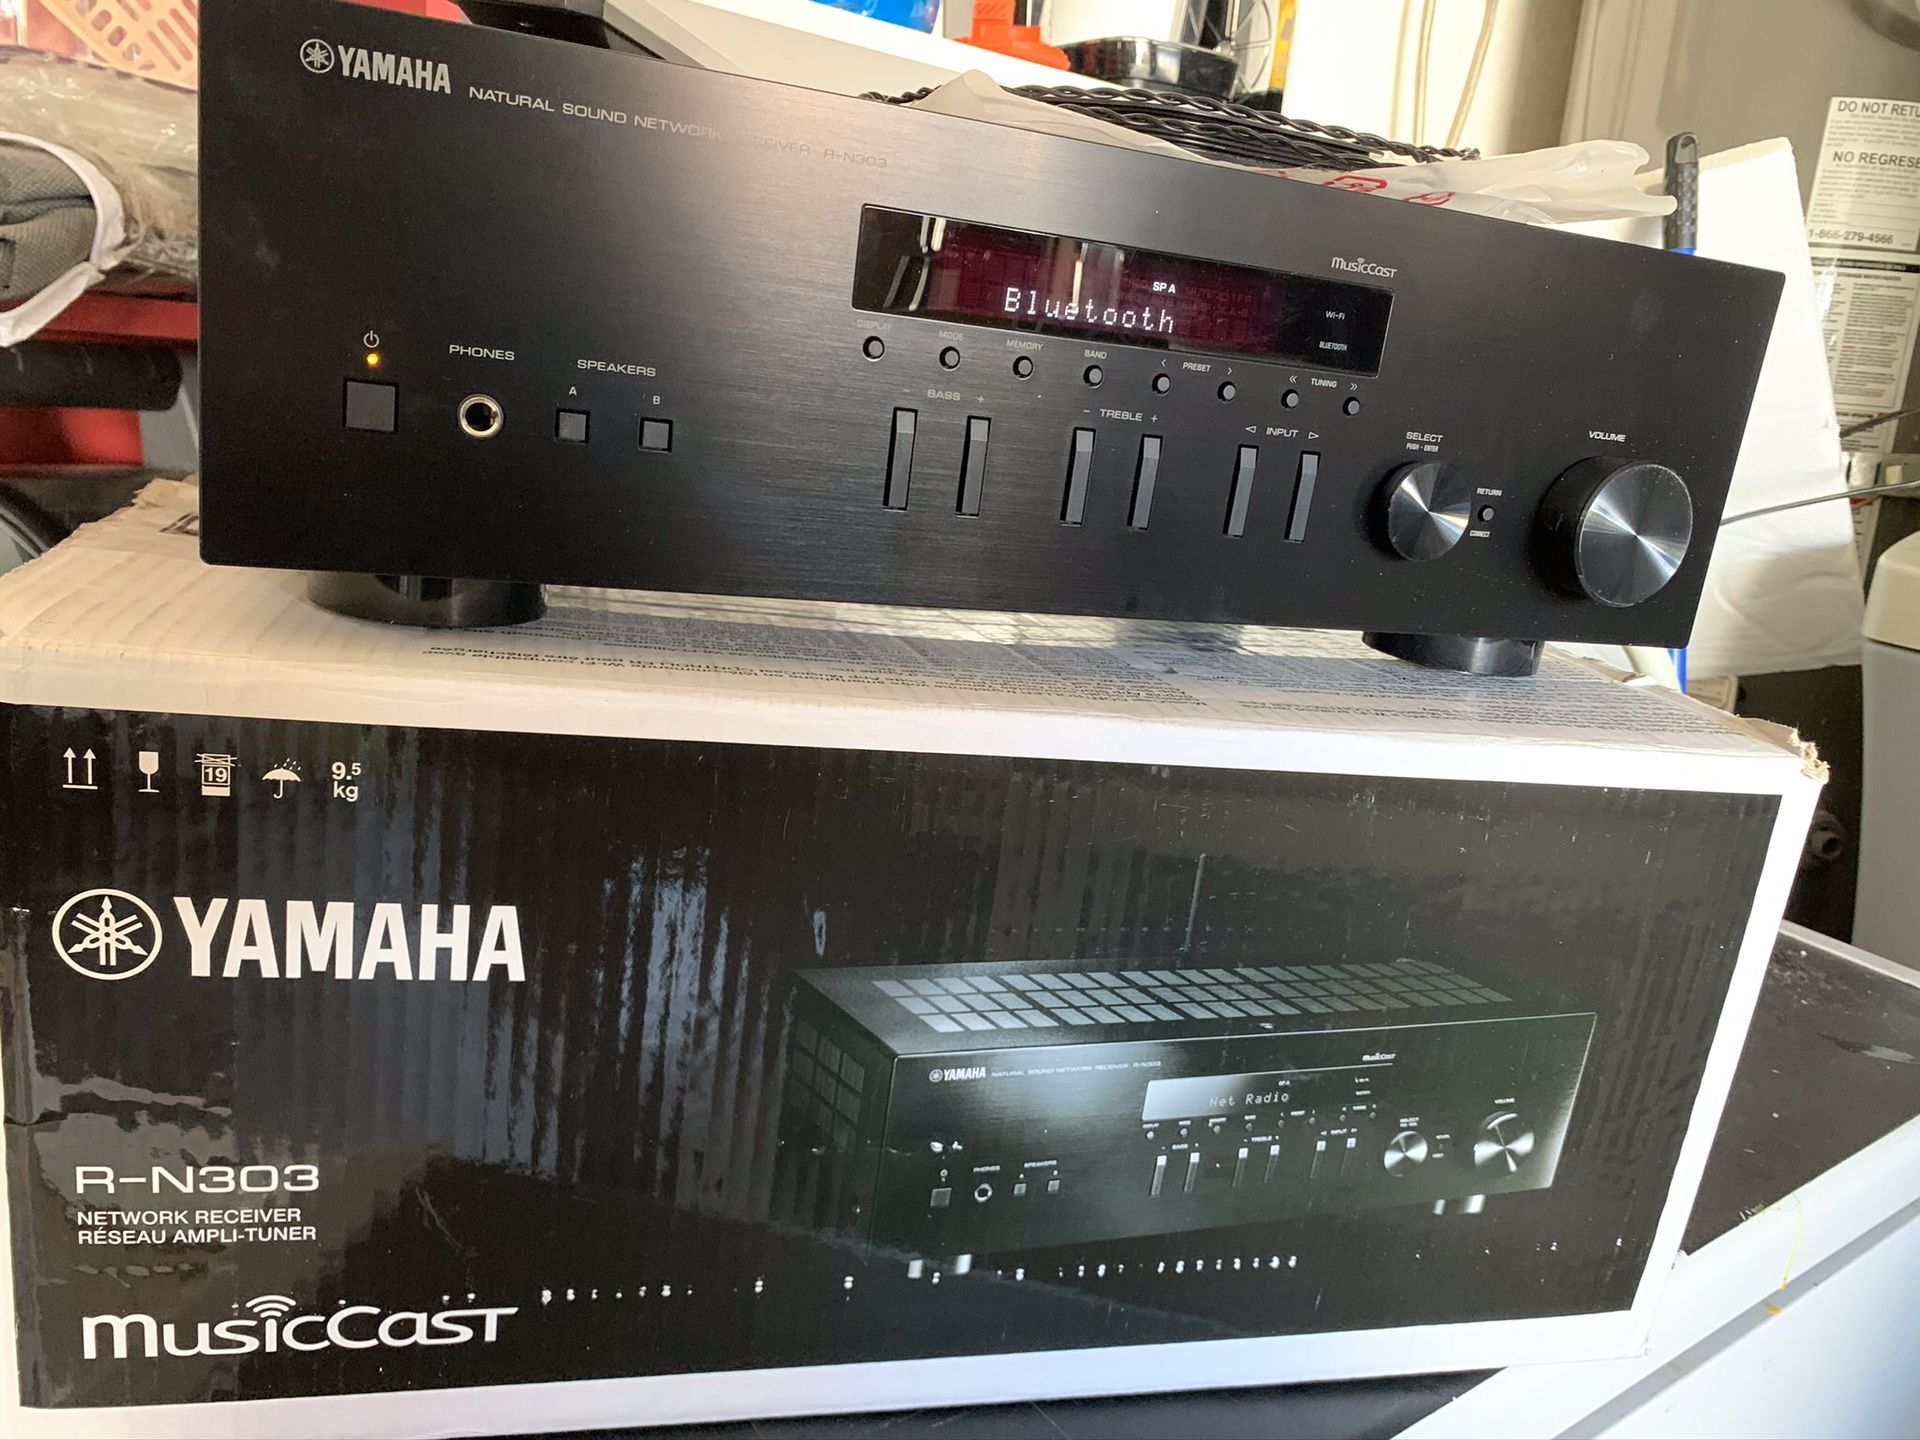 Yamaha stereo receiver RN303 WiFi Bluetooth 200 watts / 2 channel / 4 input / am fm tuner / new excellent working condition open box never used i